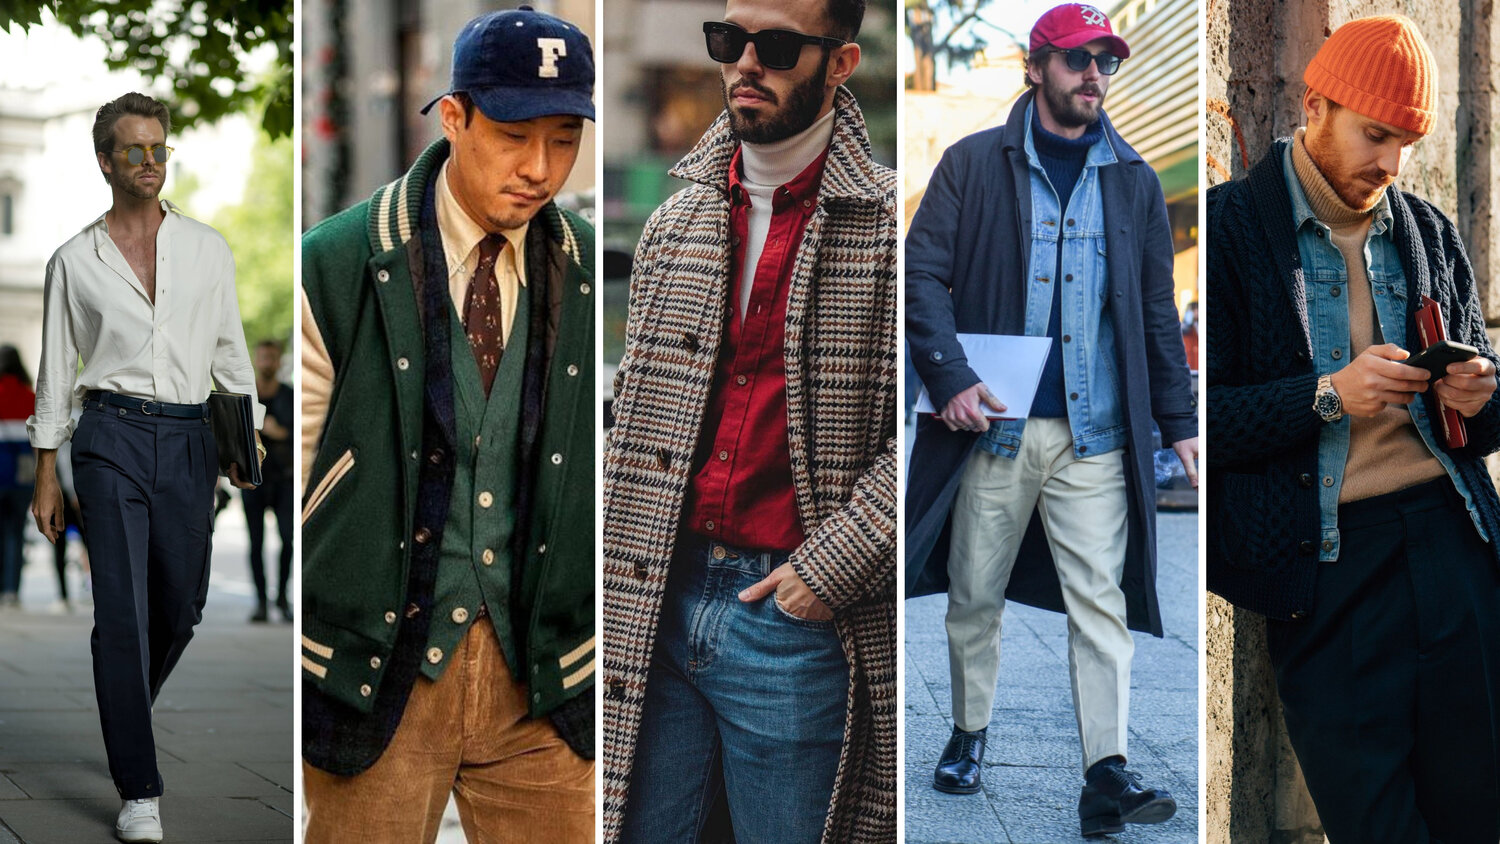 How To Match Clothing And Color For Men | Style Turner